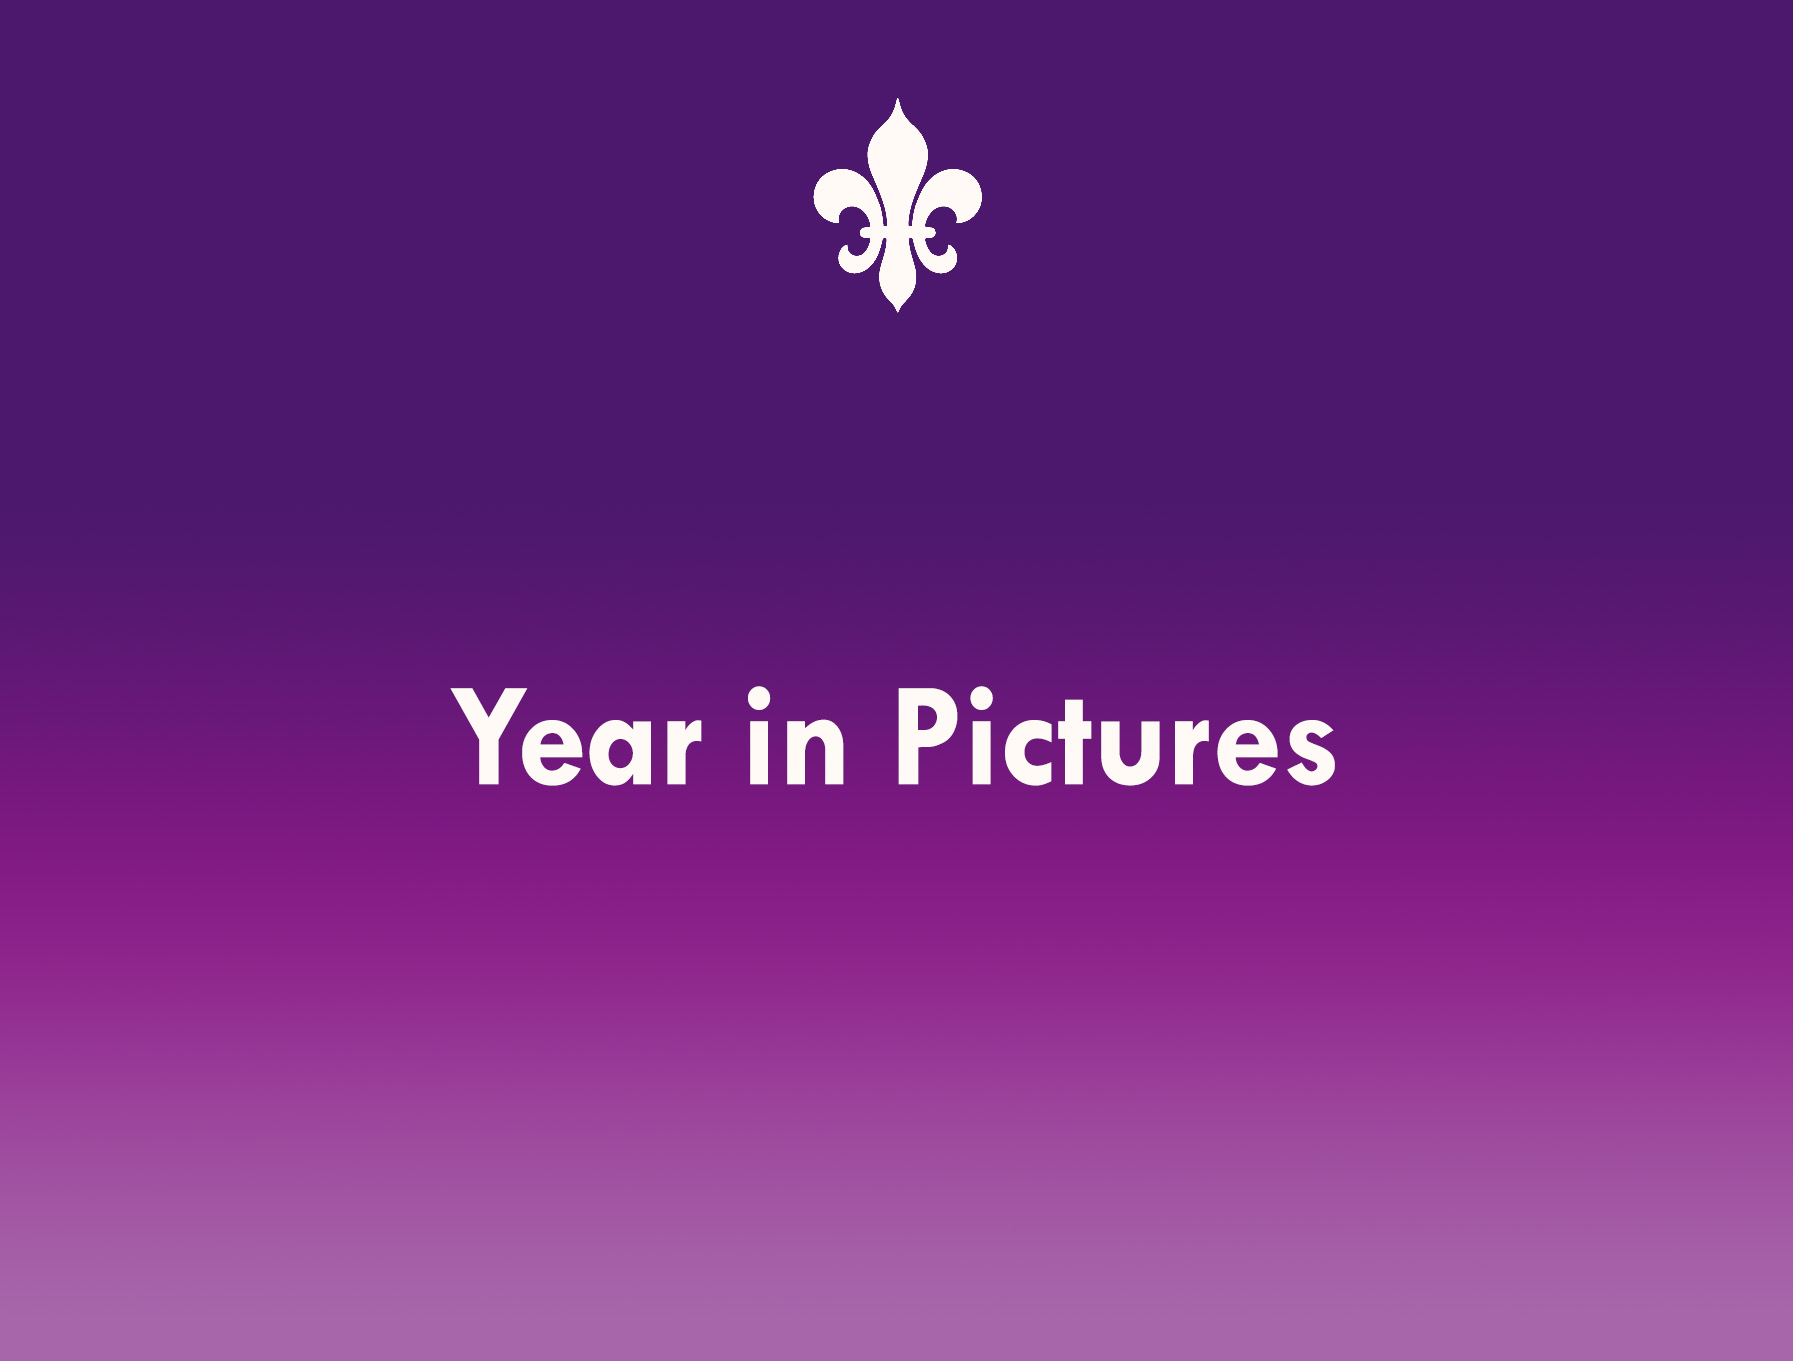 Year in Pictures